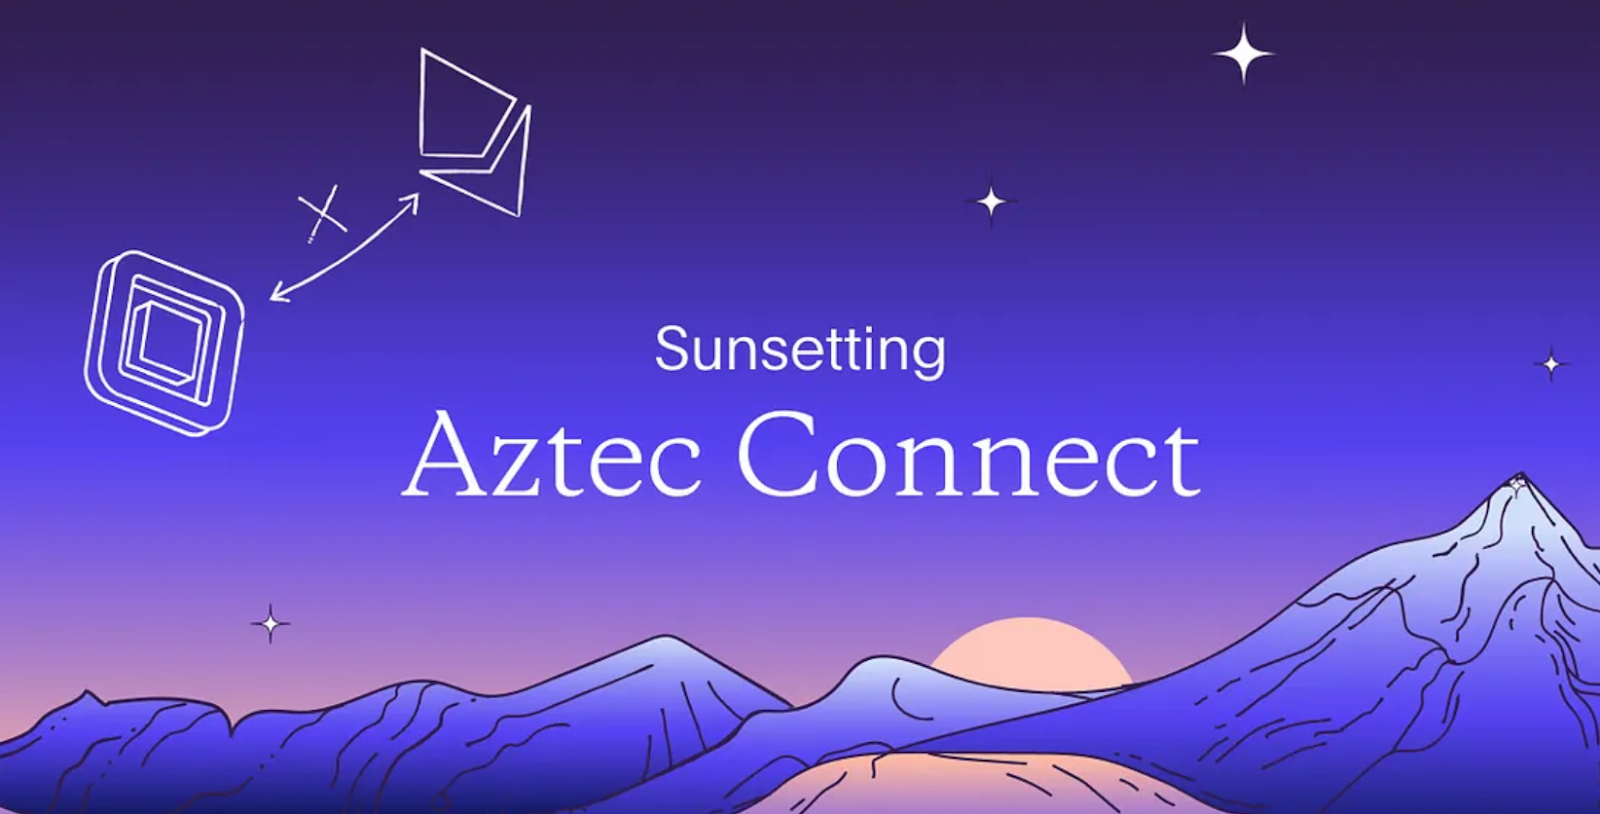 Sunsetting Aztec Connect